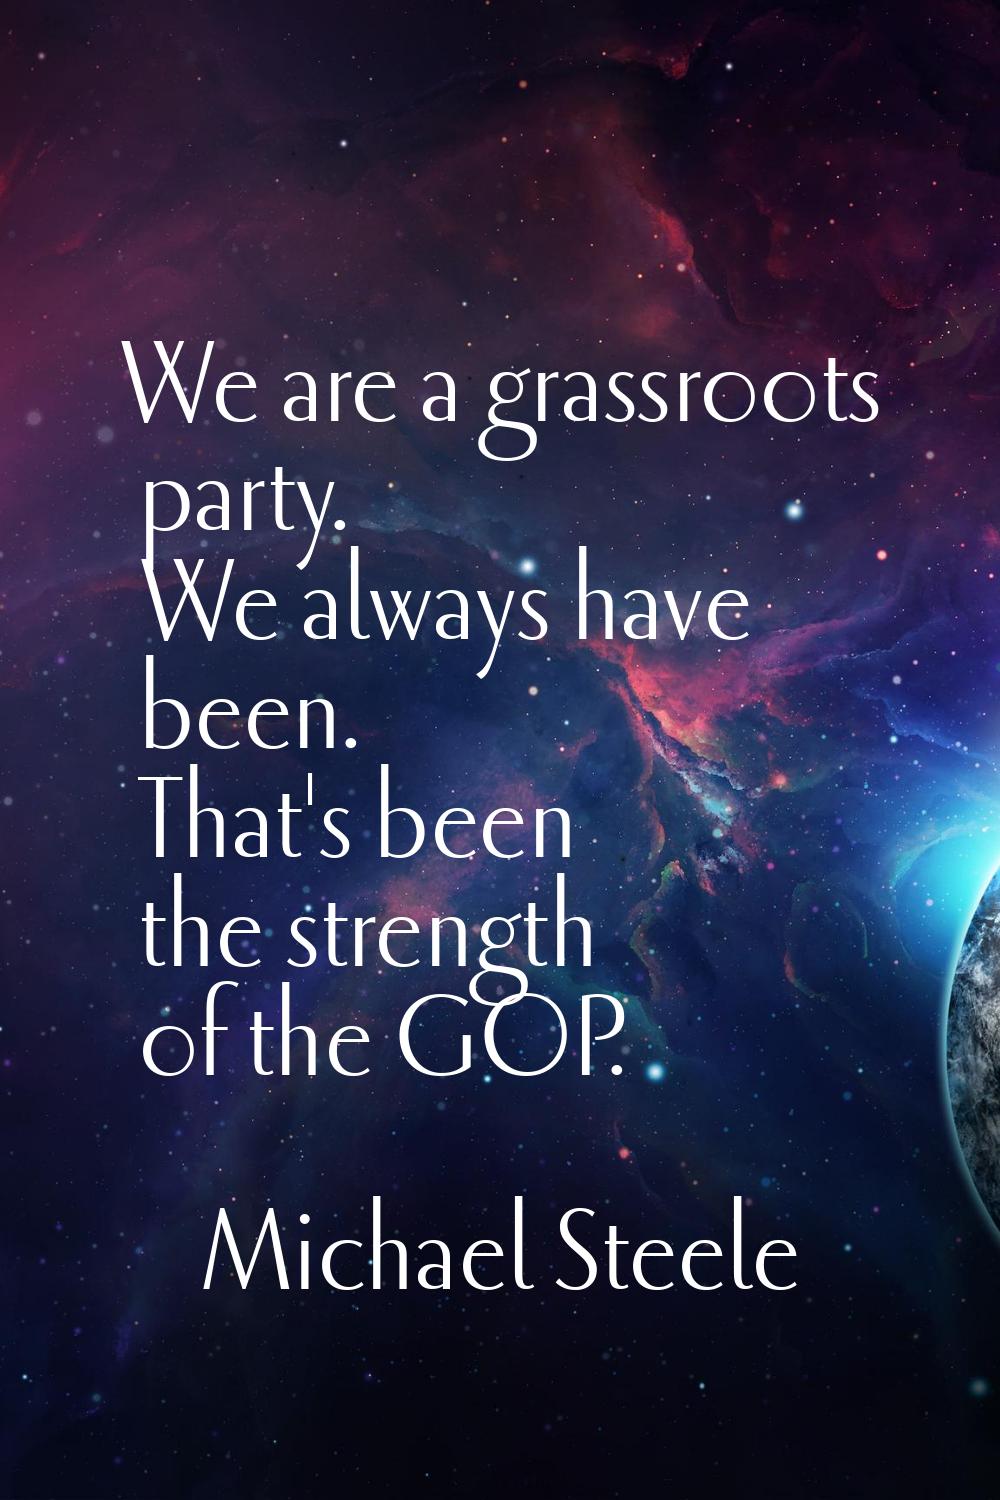 We are a grassroots party. We always have been. That's been the strength of the GOP.